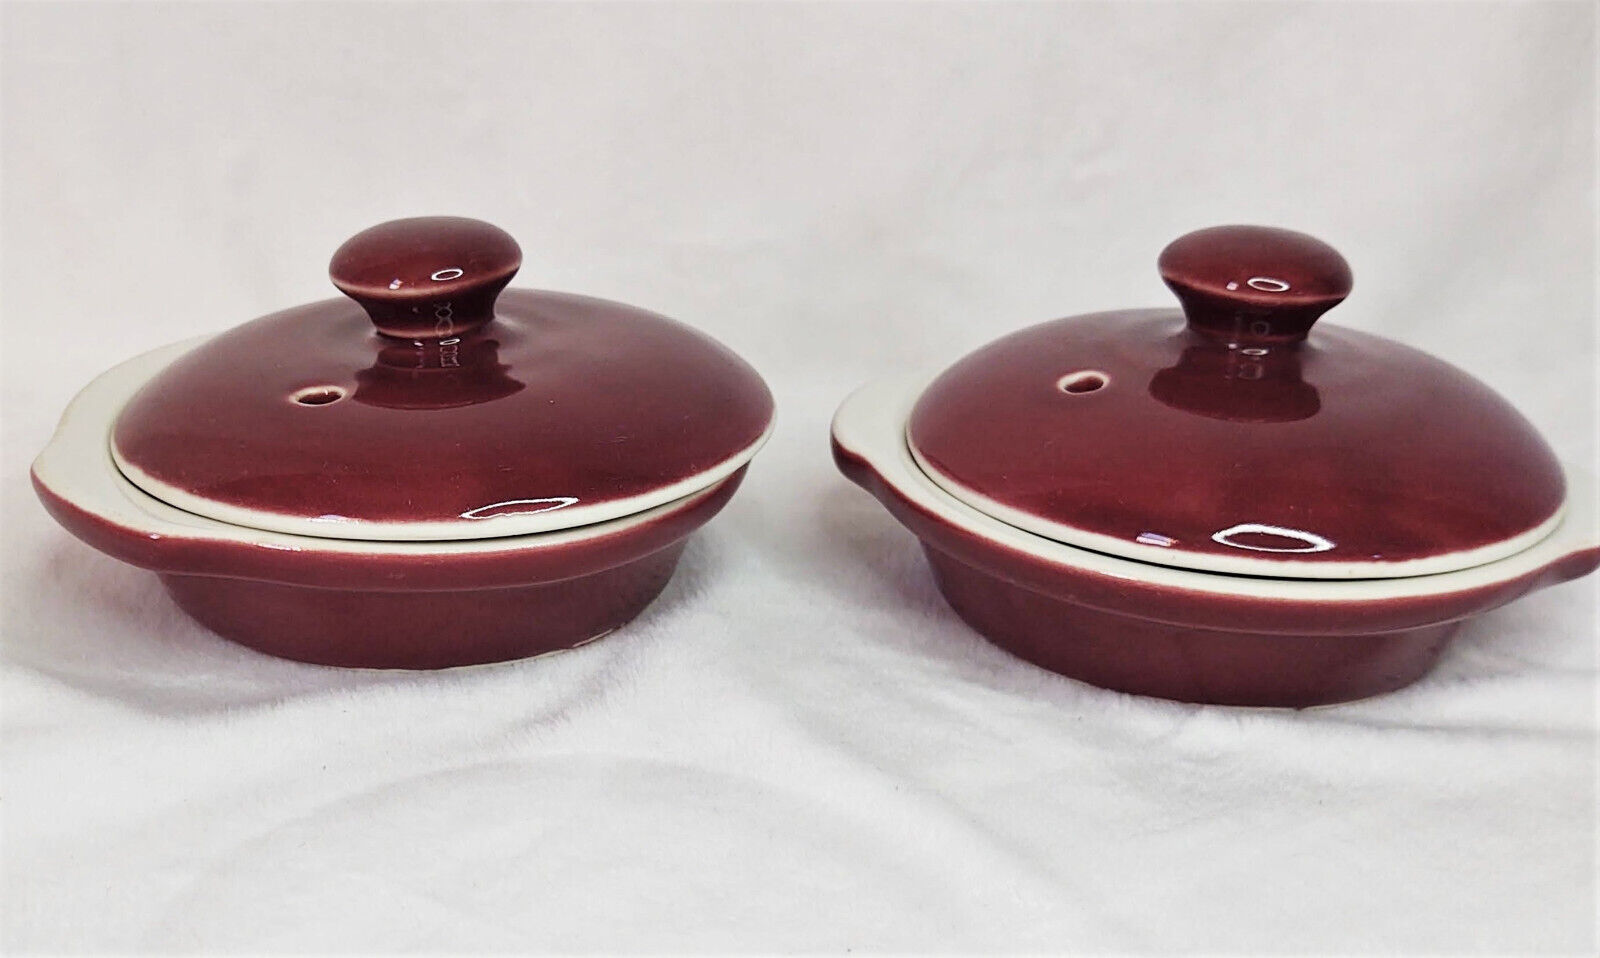 Hall China 511 Restaurant Ware Personal 3oz Baking Dishes w/Lids Dk Red Set of 2